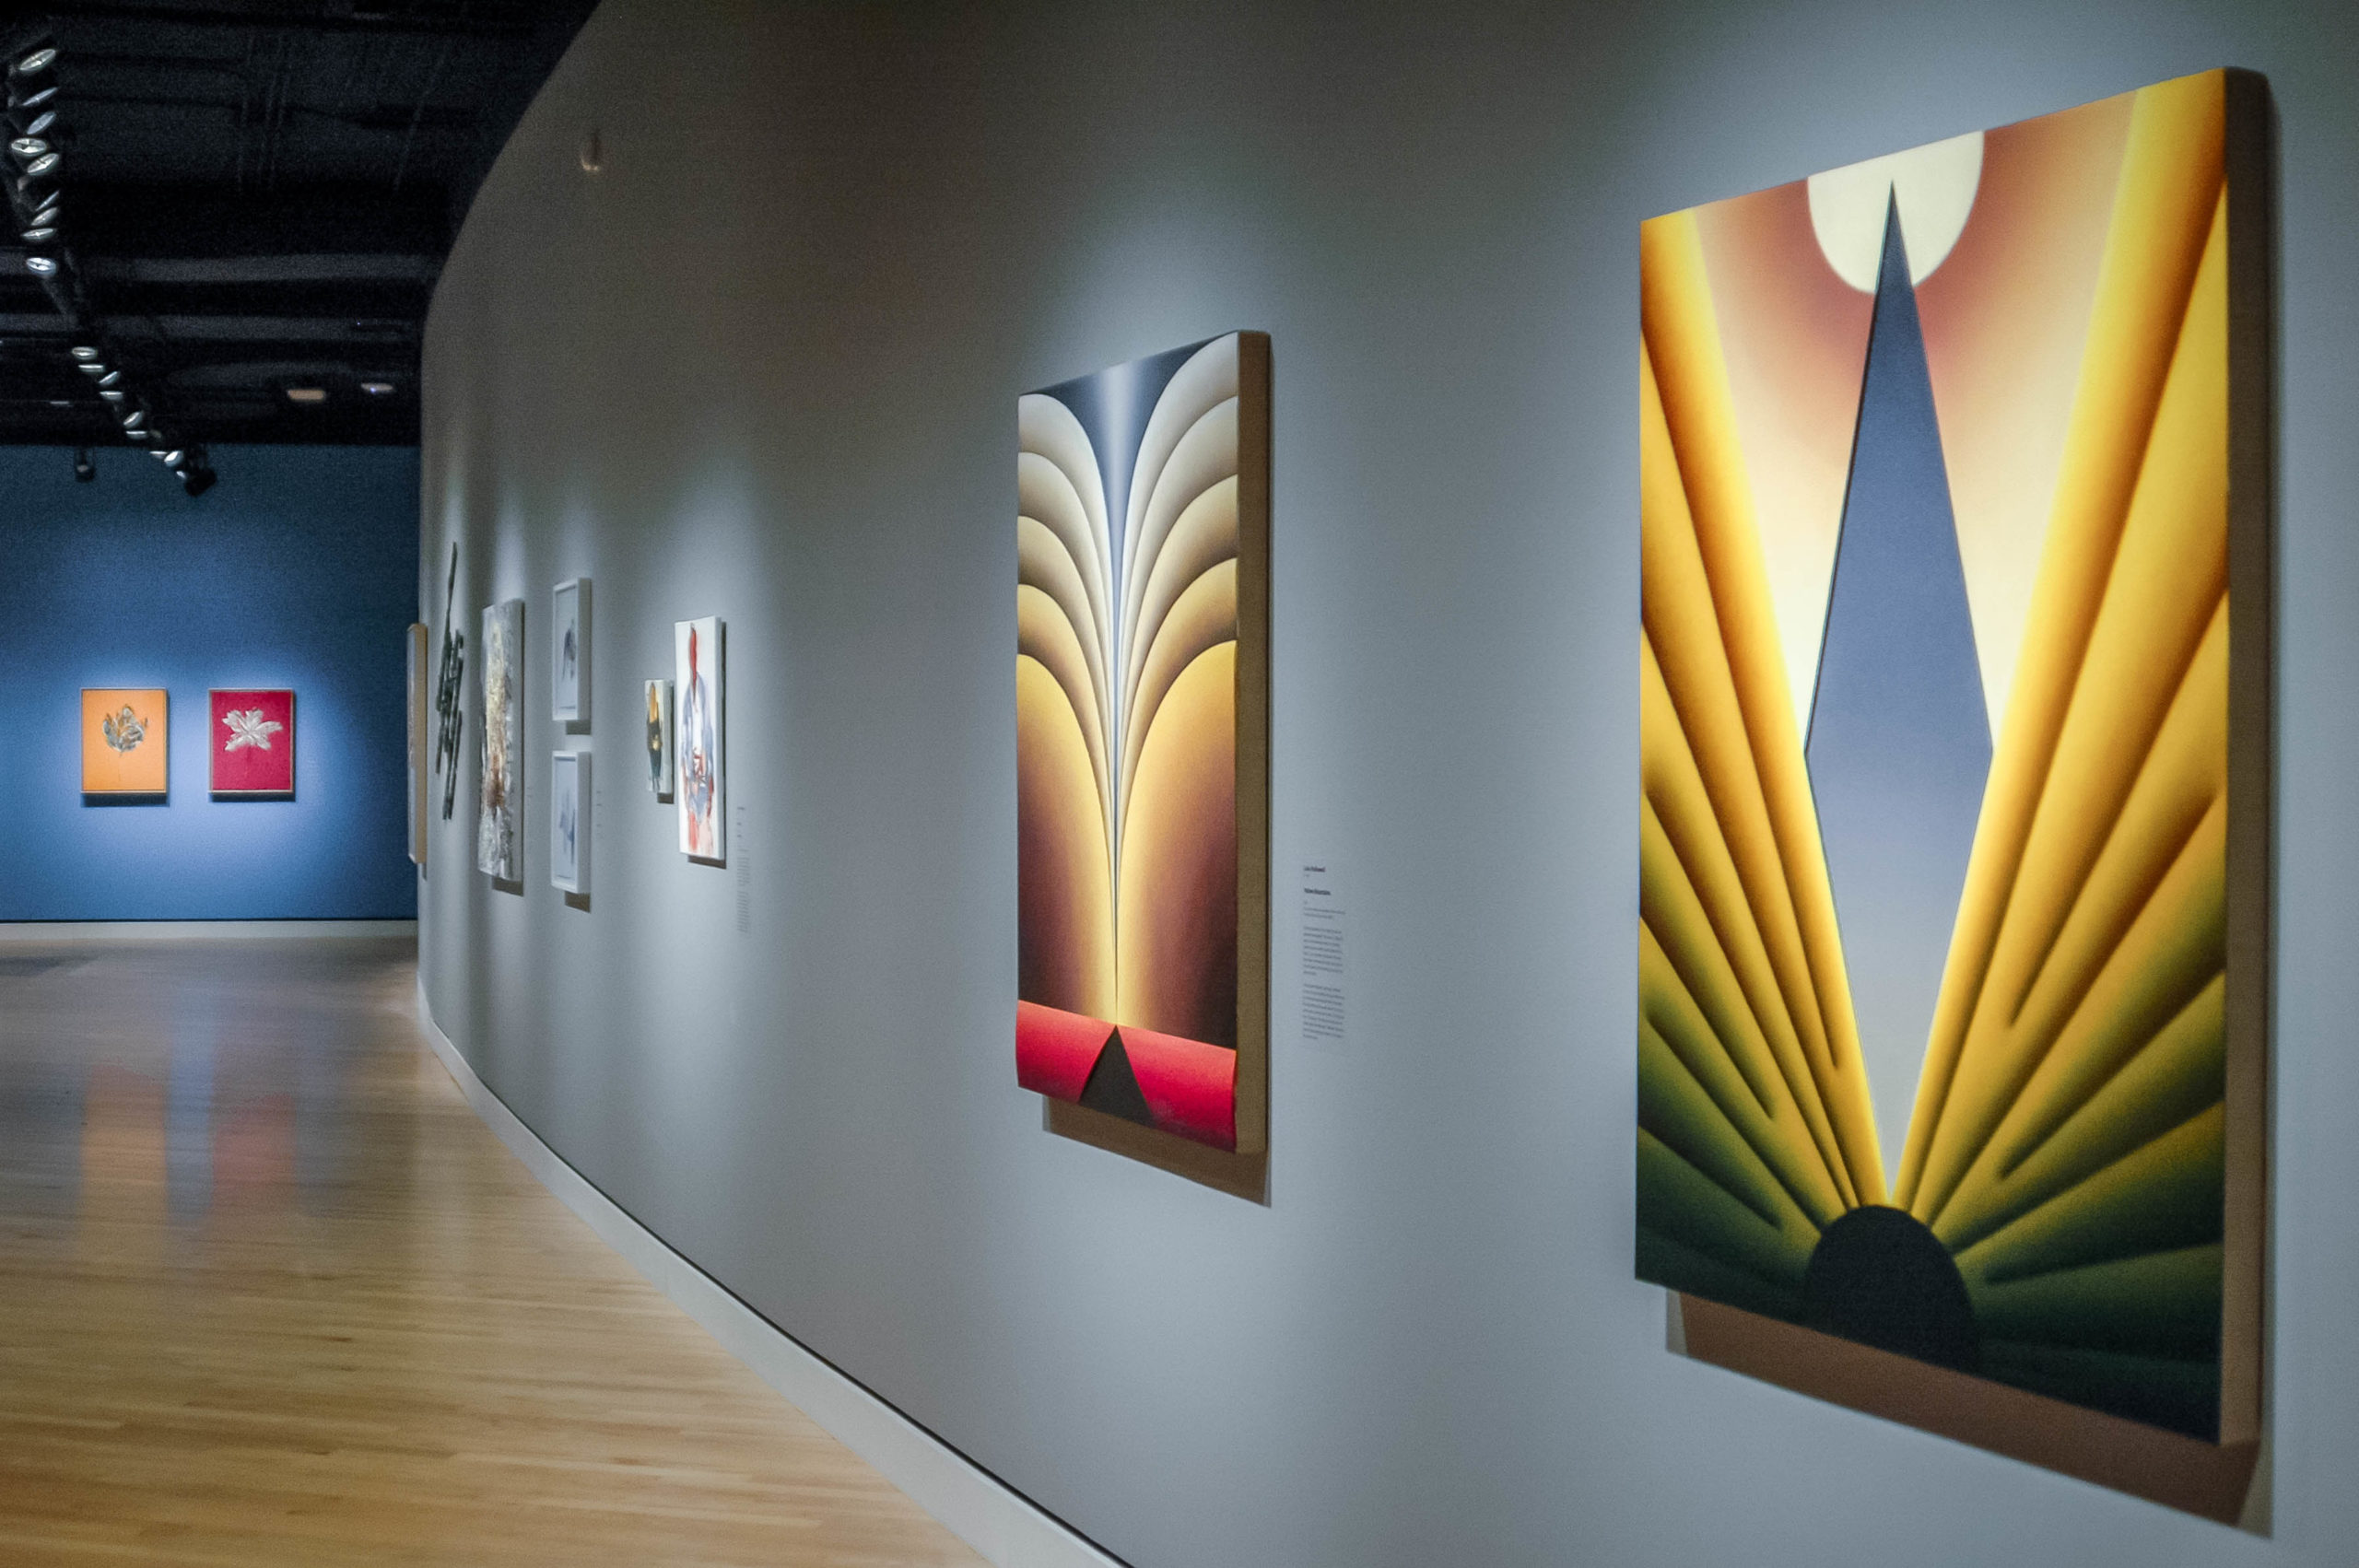 Georgia O’Keeffe On Display at Crystal Bridges | Only In Arkansas